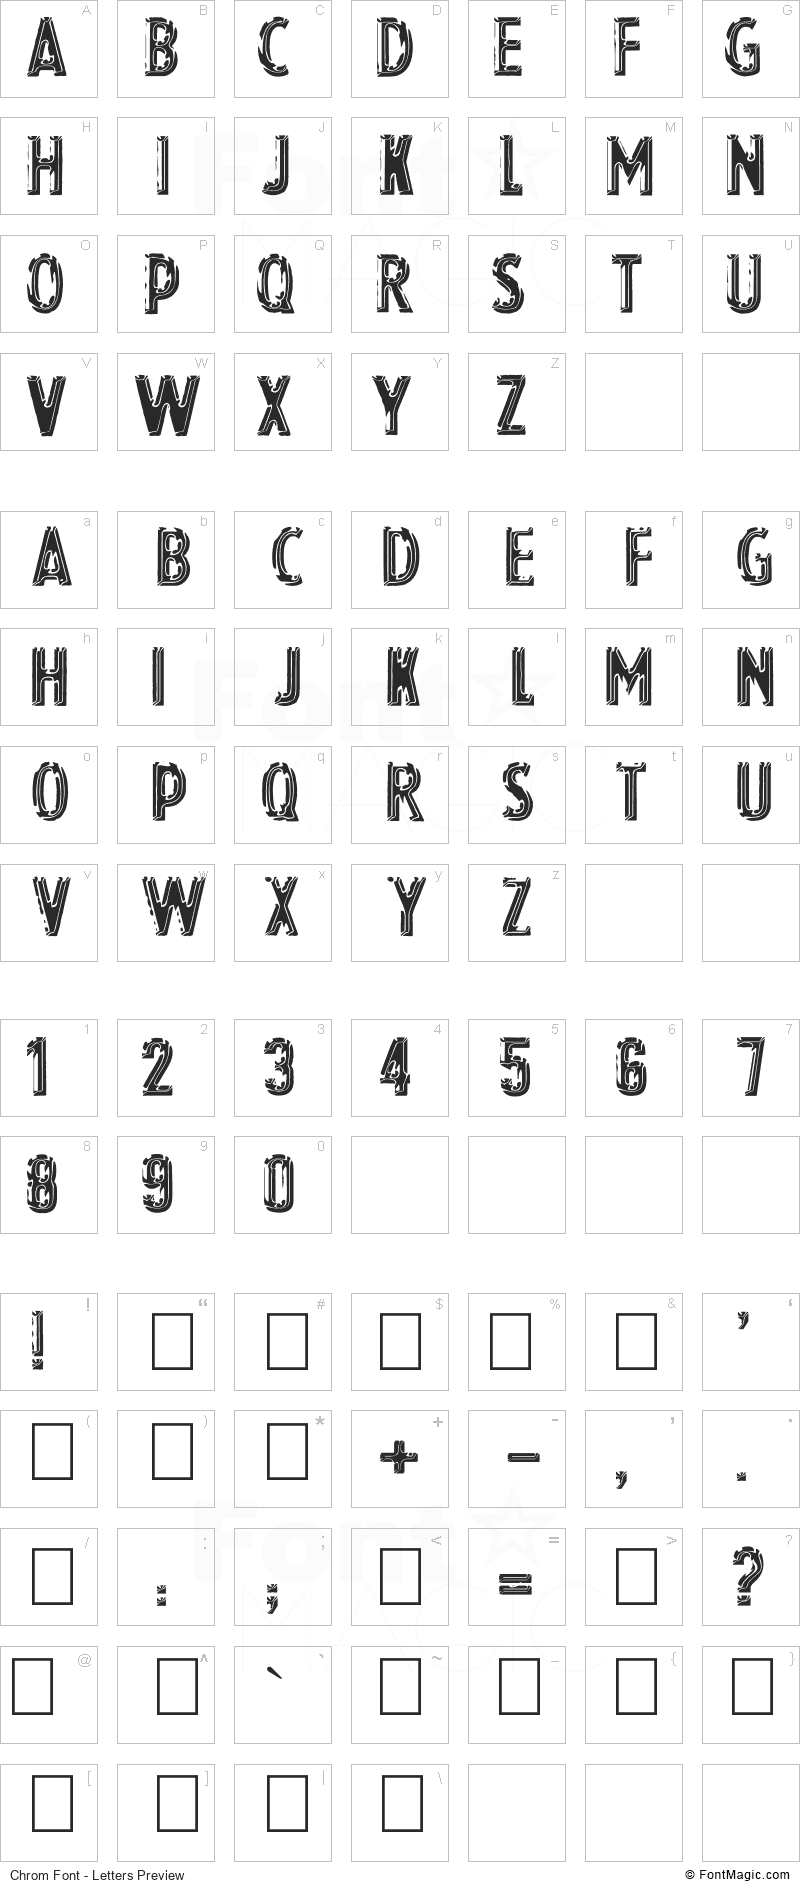 Chrom Font - All Latters Preview Chart